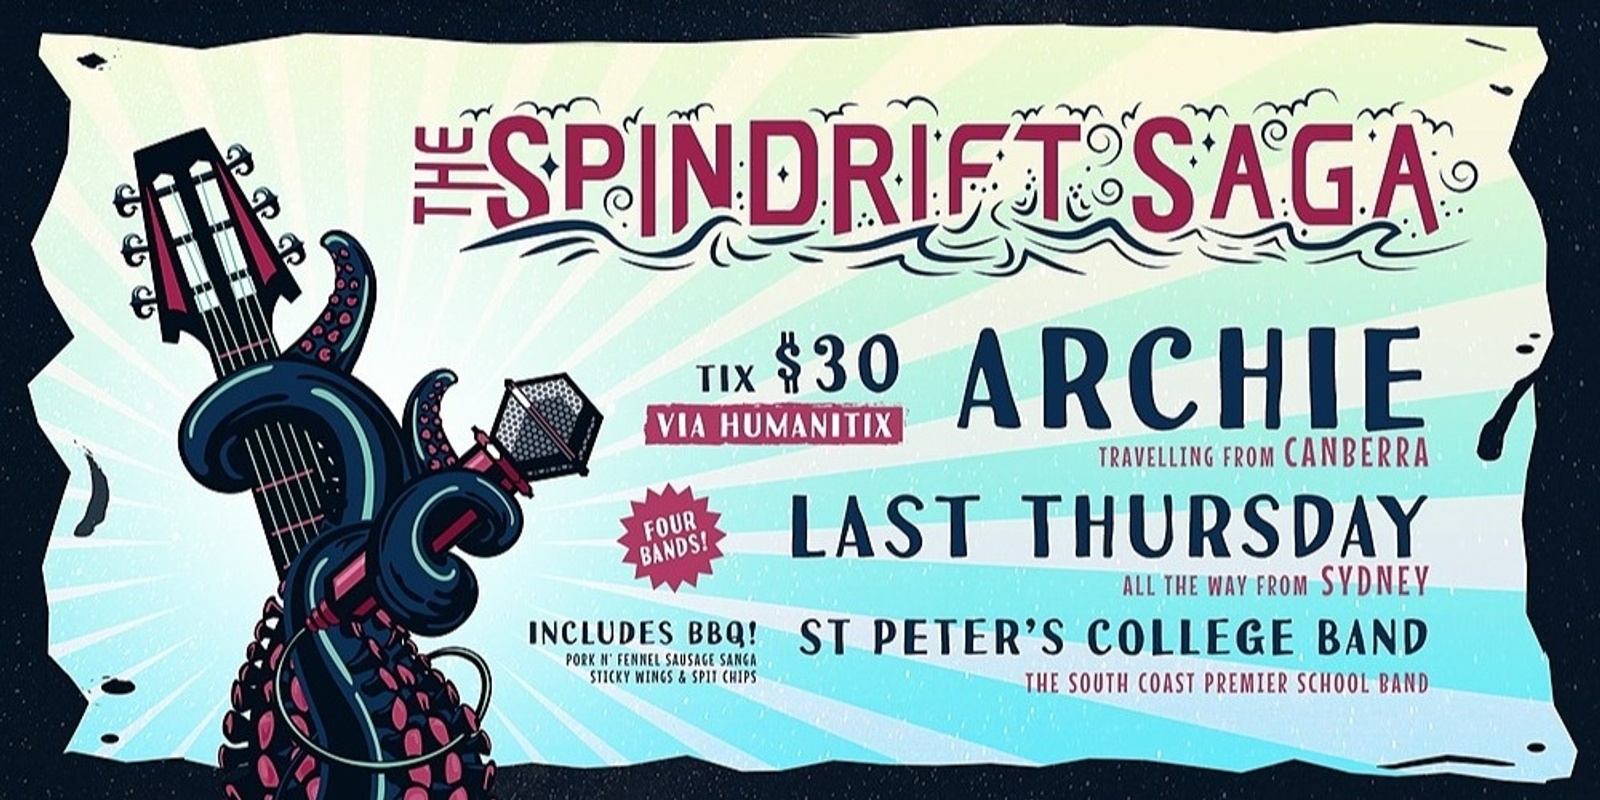 Banner image for The Spindrift Saga, ARCHIE, Last Thursday and the St Peter's College Band @ Smokey Dan's